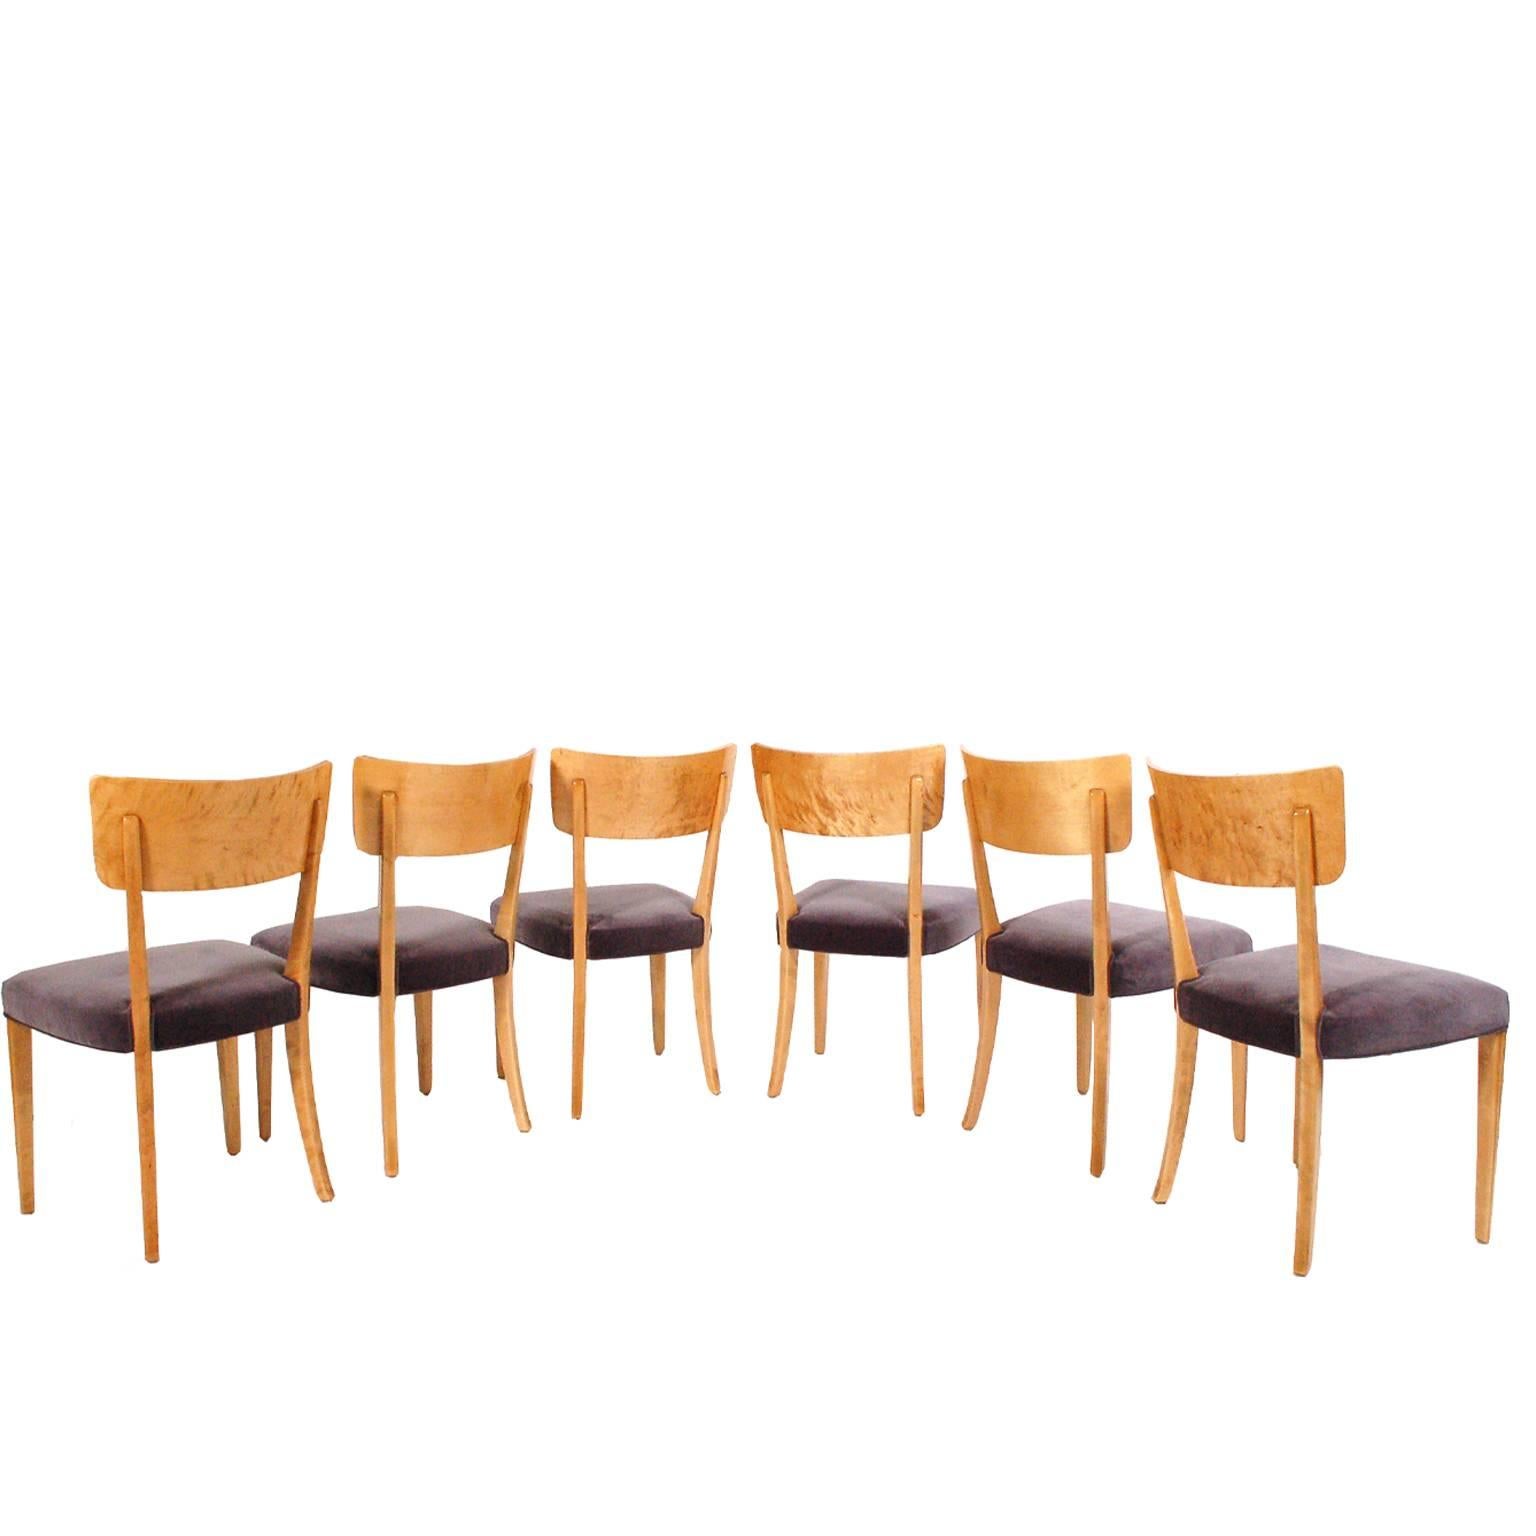 Six dining chairs with curved back; solid birch frames, backrest of ashwood with bird's-eye maple band. Fluted design to legs. Upholstered in new grey velour.